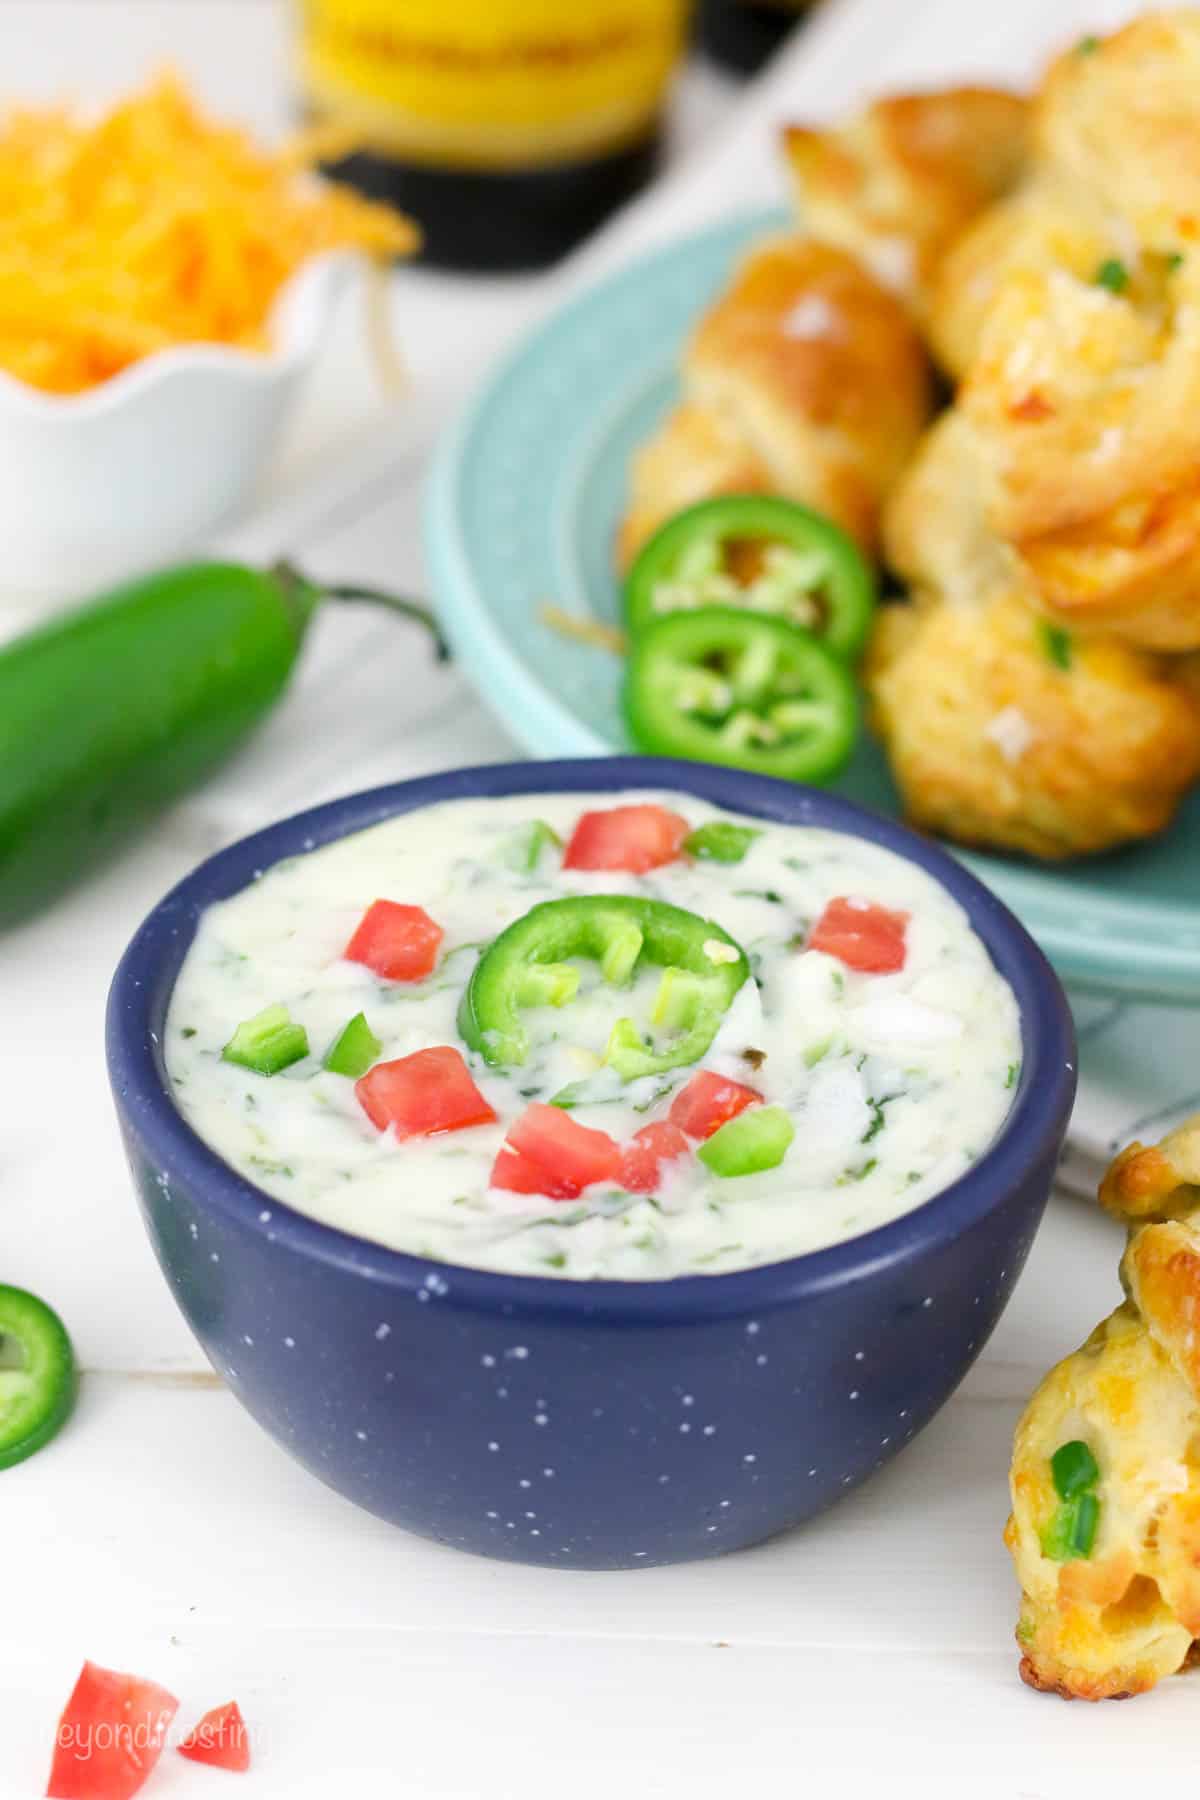 bowl of cheddar jalapeño dip garnished with tomato and jalapeño with a plate of soft pretzels in the background